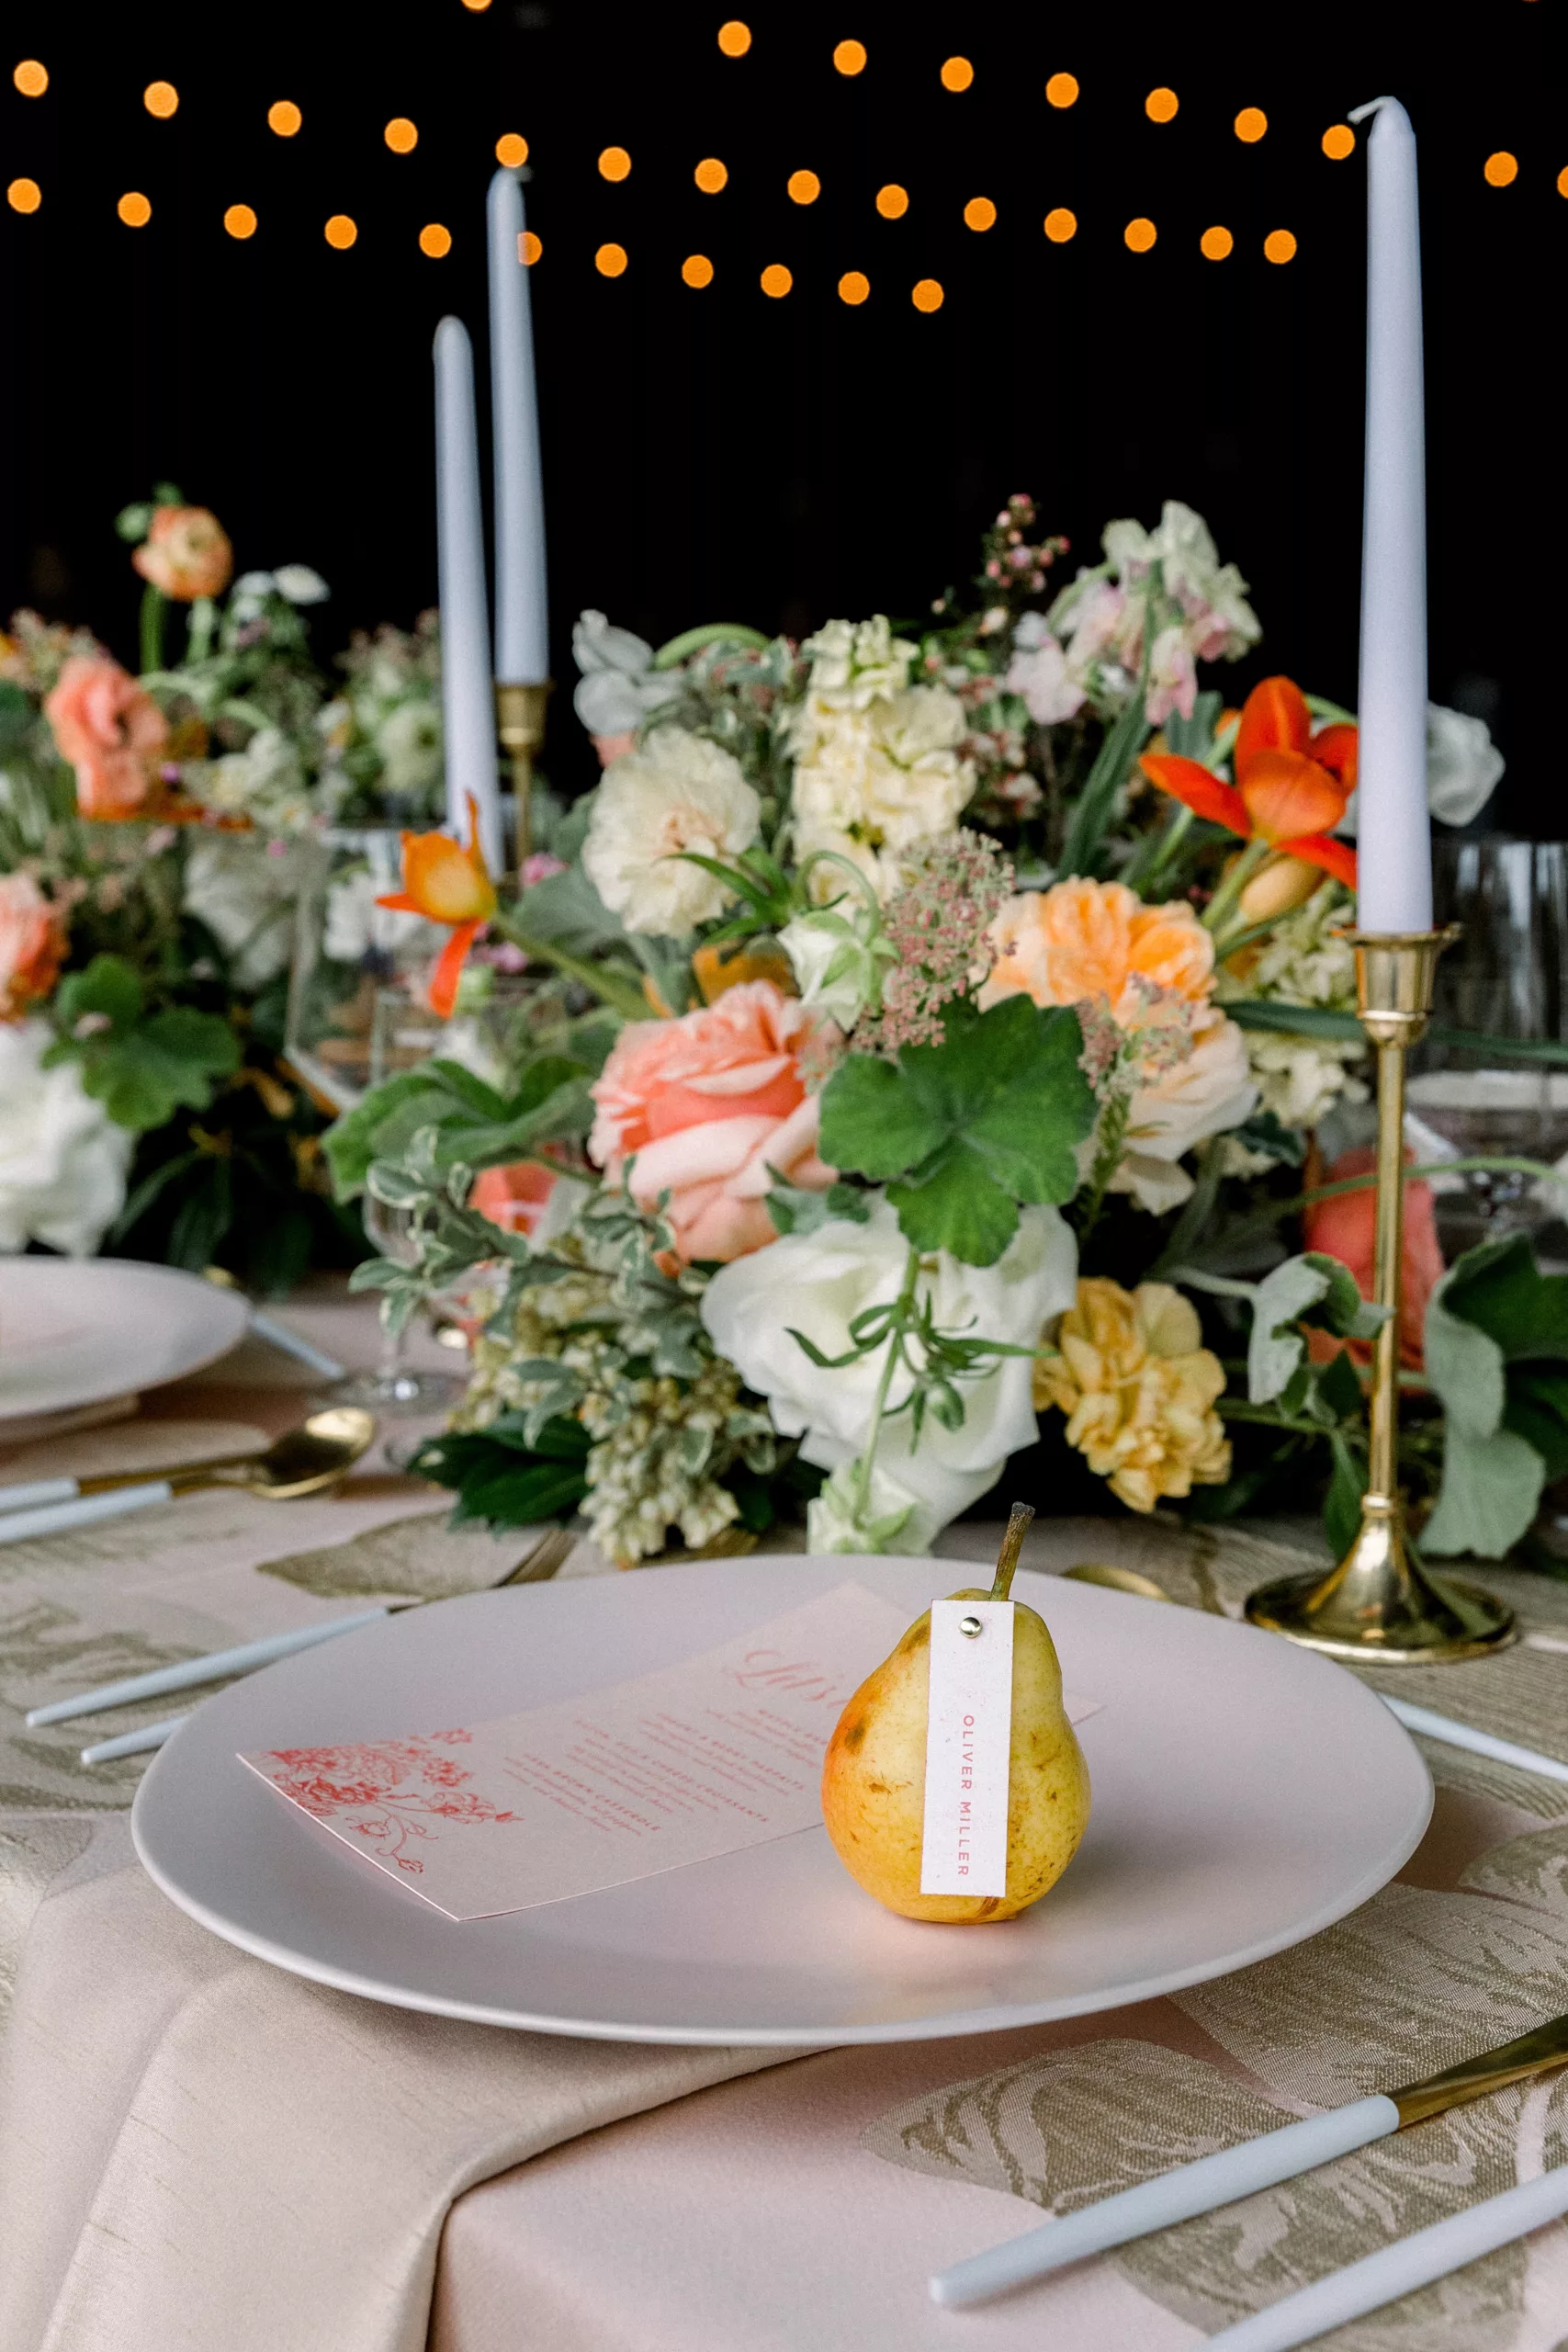 Details of an individual table setting at a Chateau Elan Wedding with a pear on each plate and colorful florals